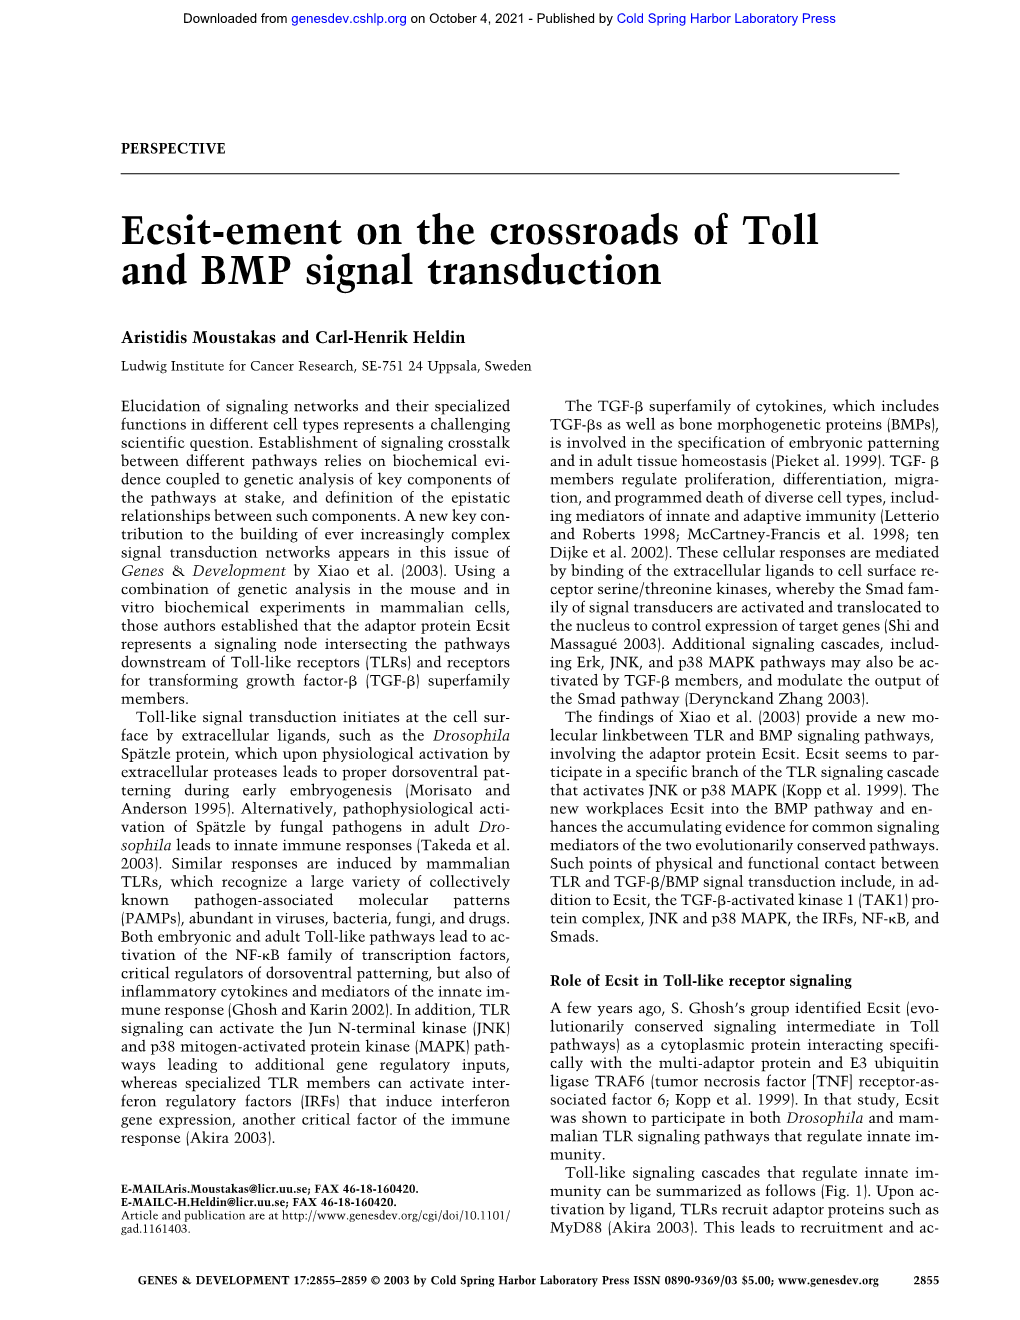 Ecsit-Ement on the Crossroads of Toll and BMP Signal Transduction